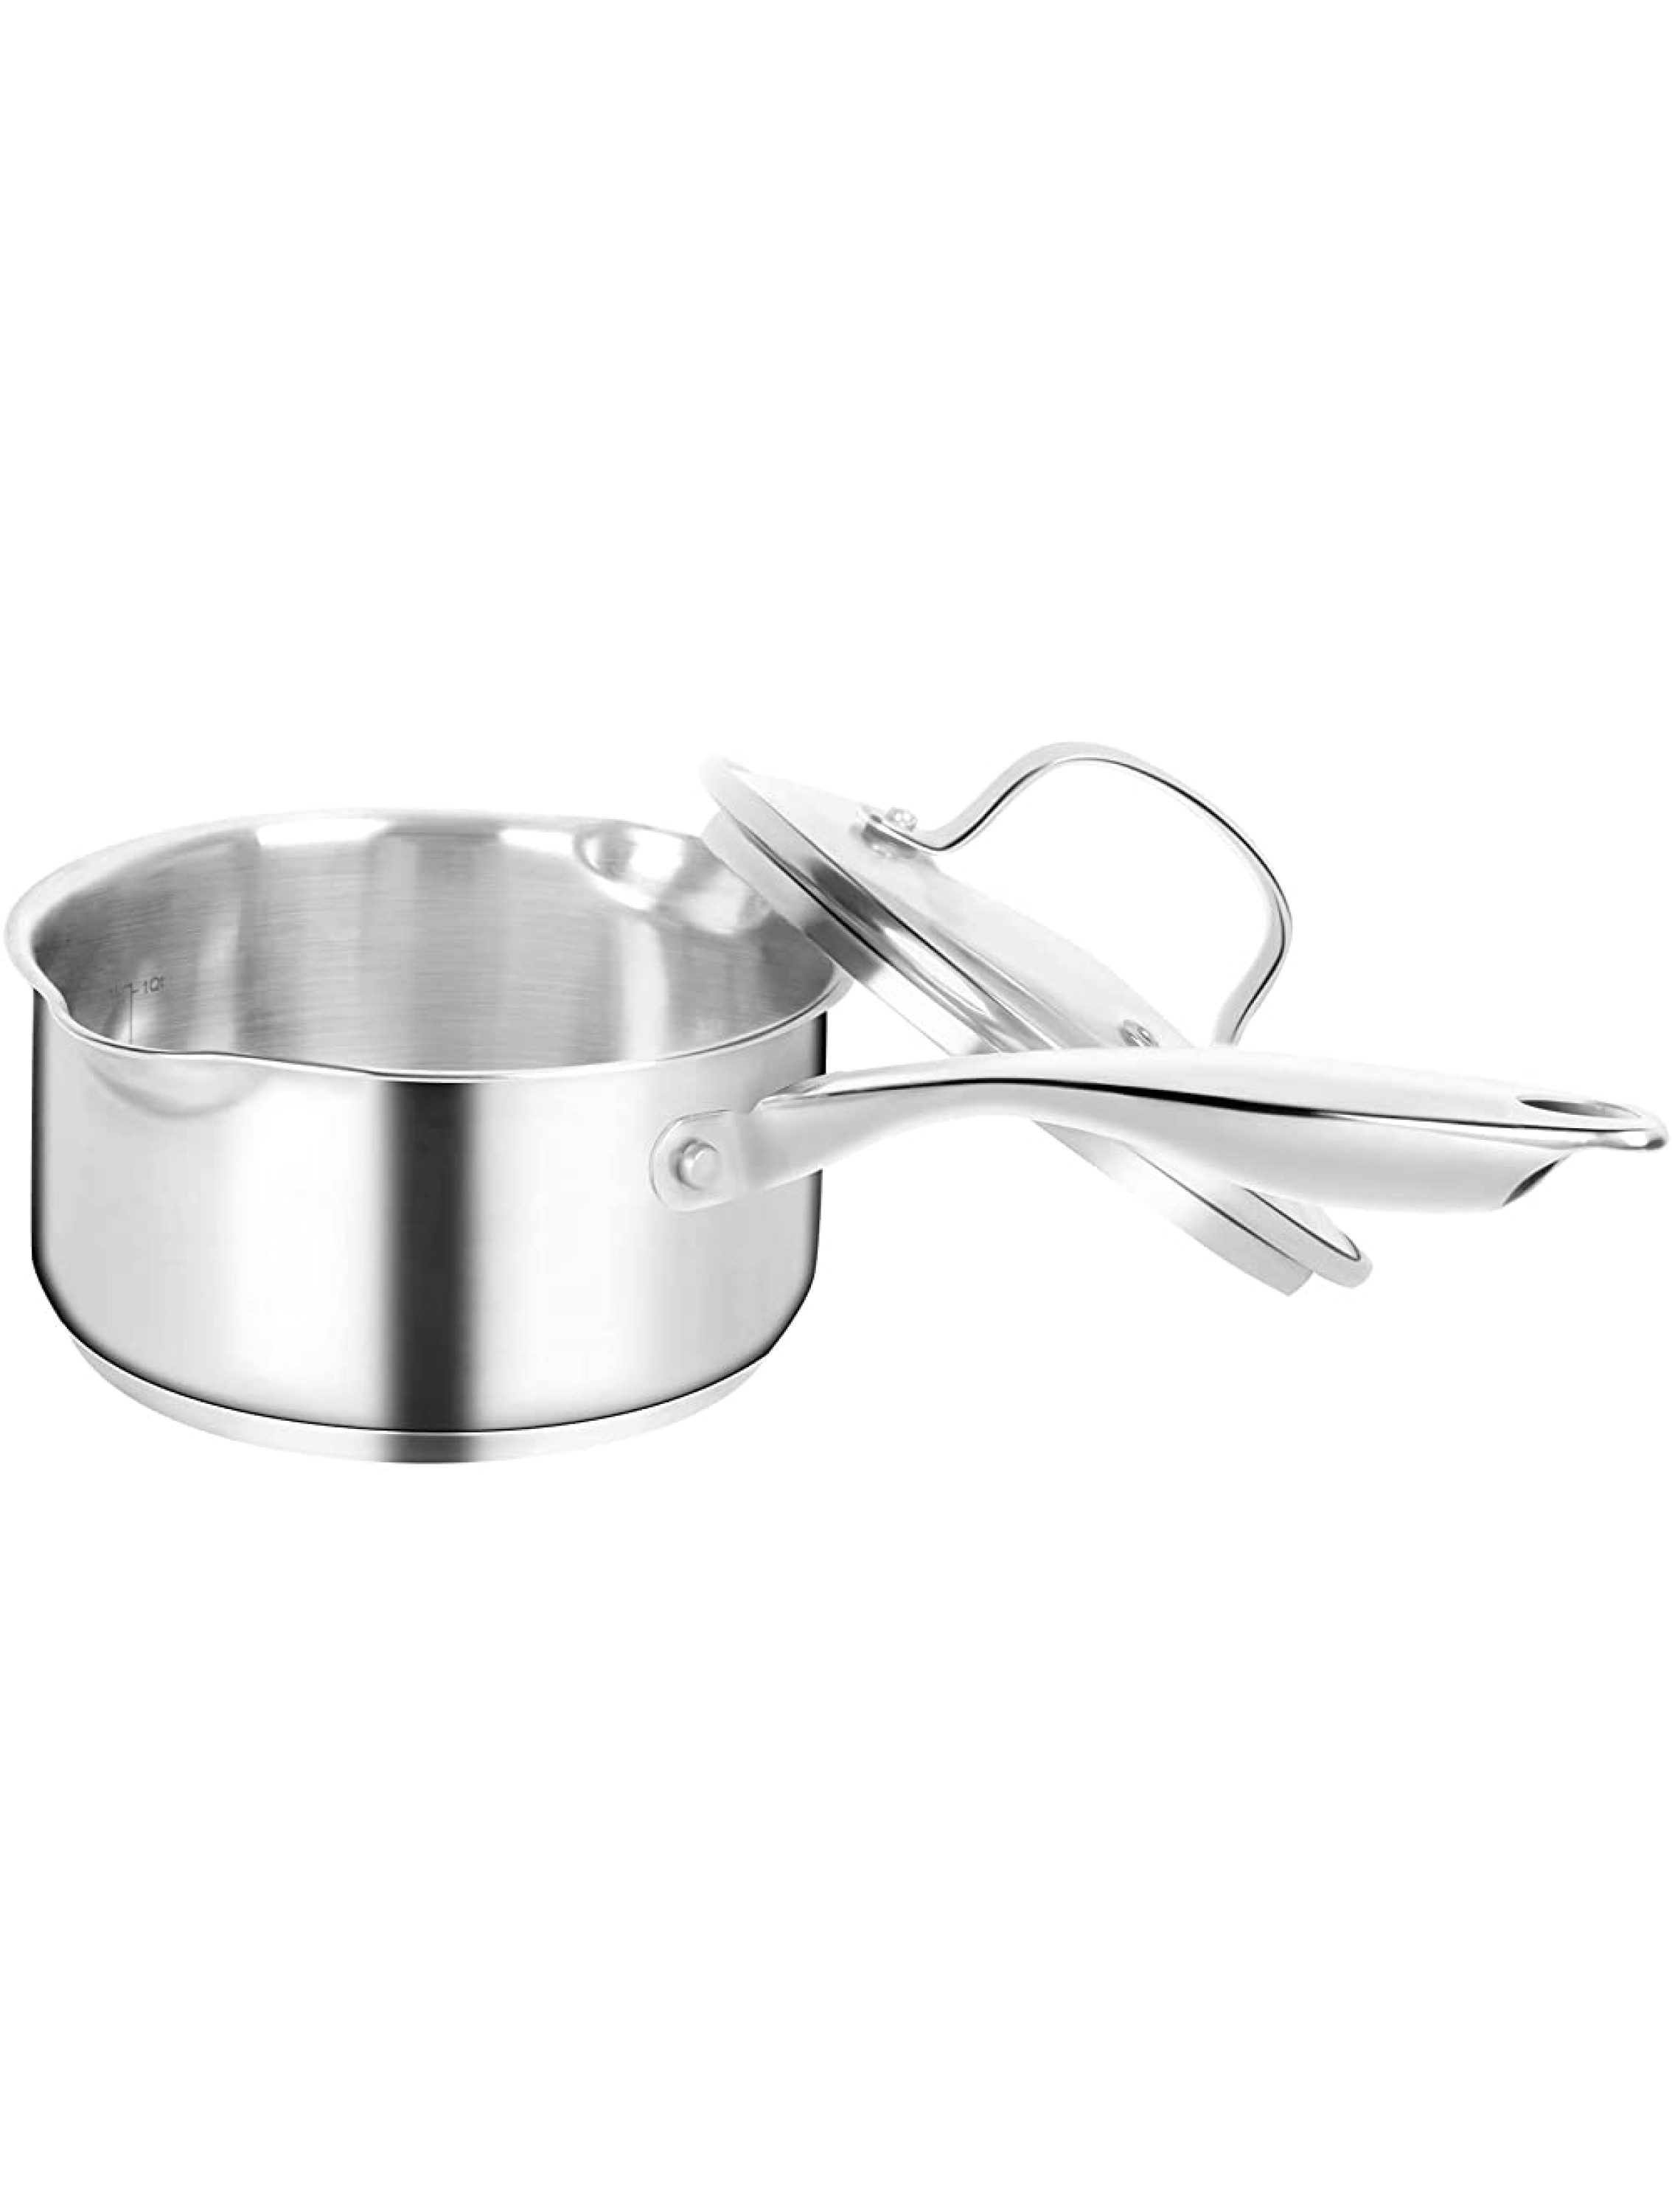 MOBUTA Stainless Steel Saucepan with Lid Small Sauce Pan Soup Pot Induction Ready Scale Mark & Tempered Glass Lid Dishwasher & Oven Safe 1.5 Quart - BEYAAWO1T